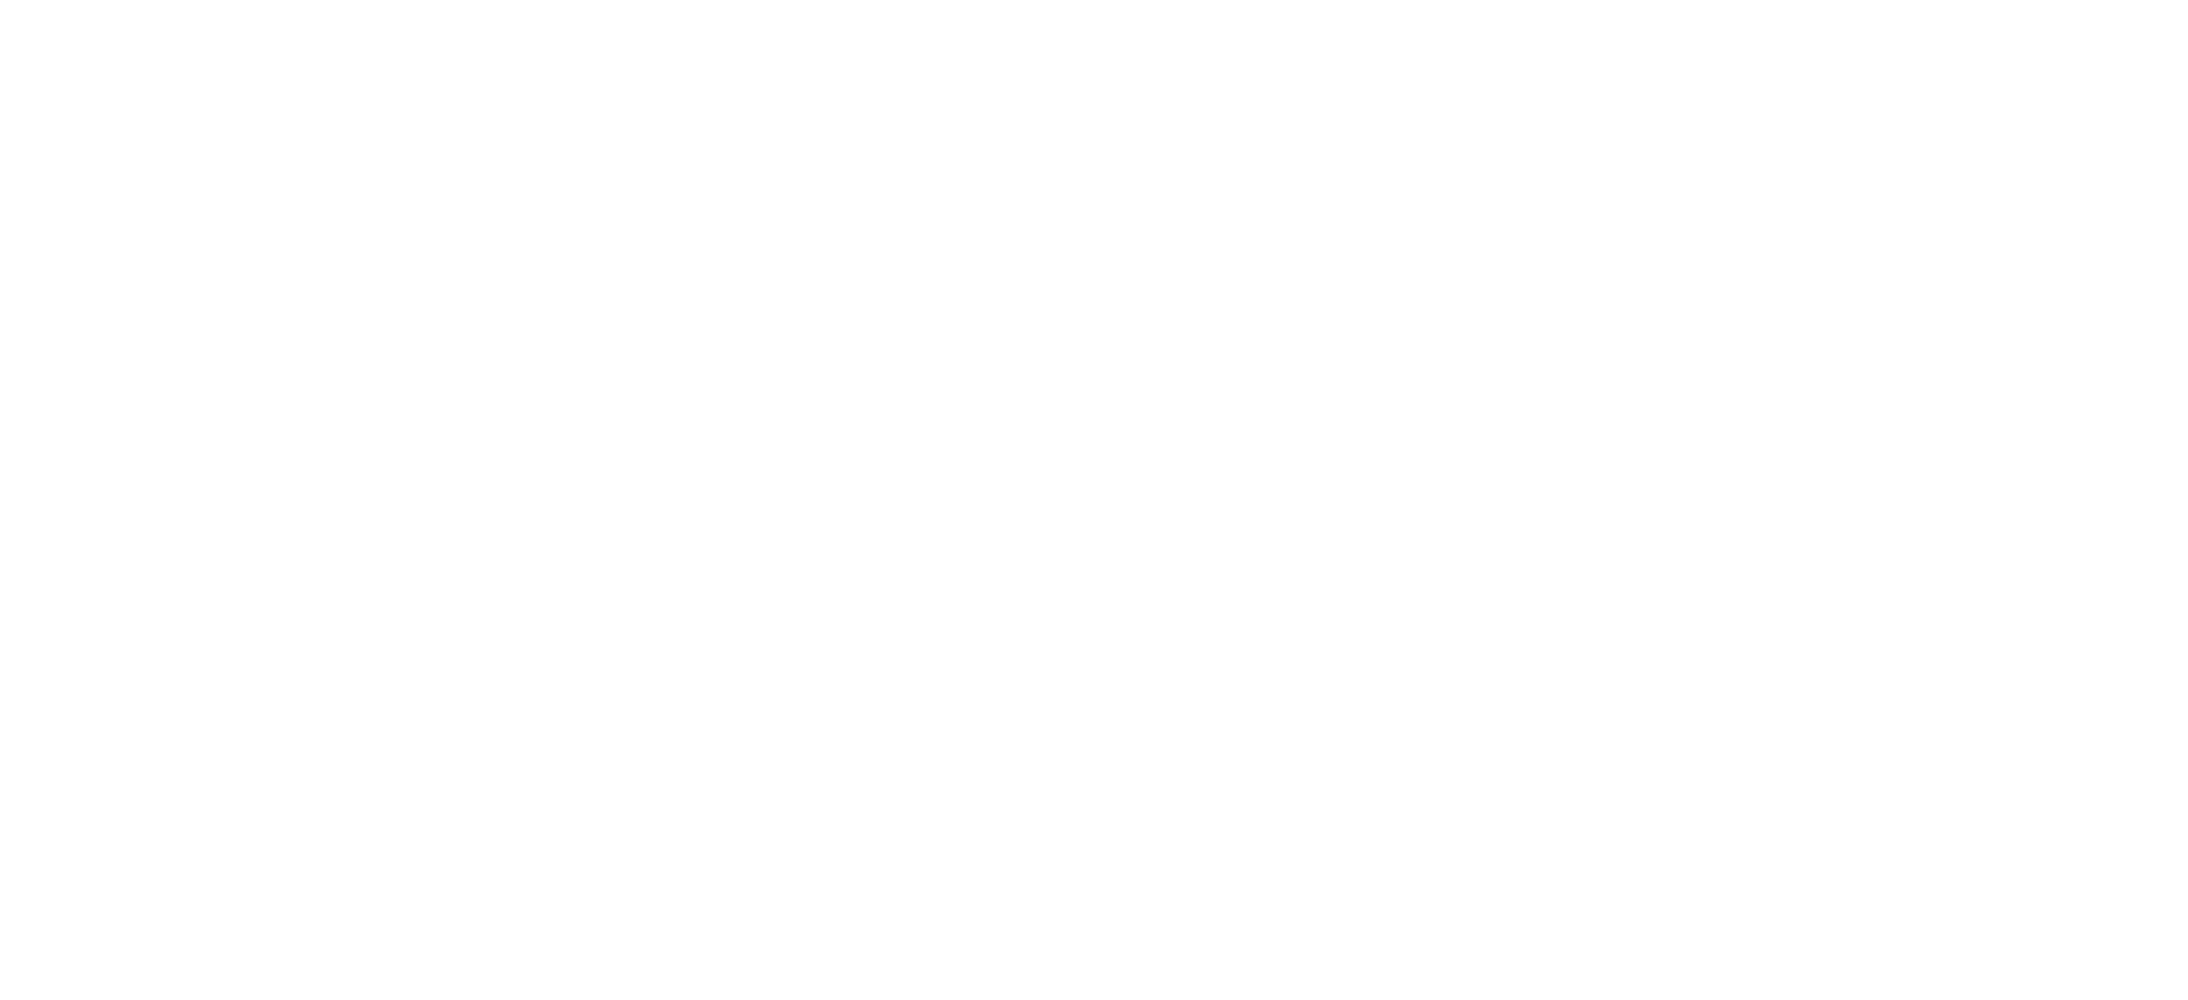 Initiative Musik Logo - They support us!